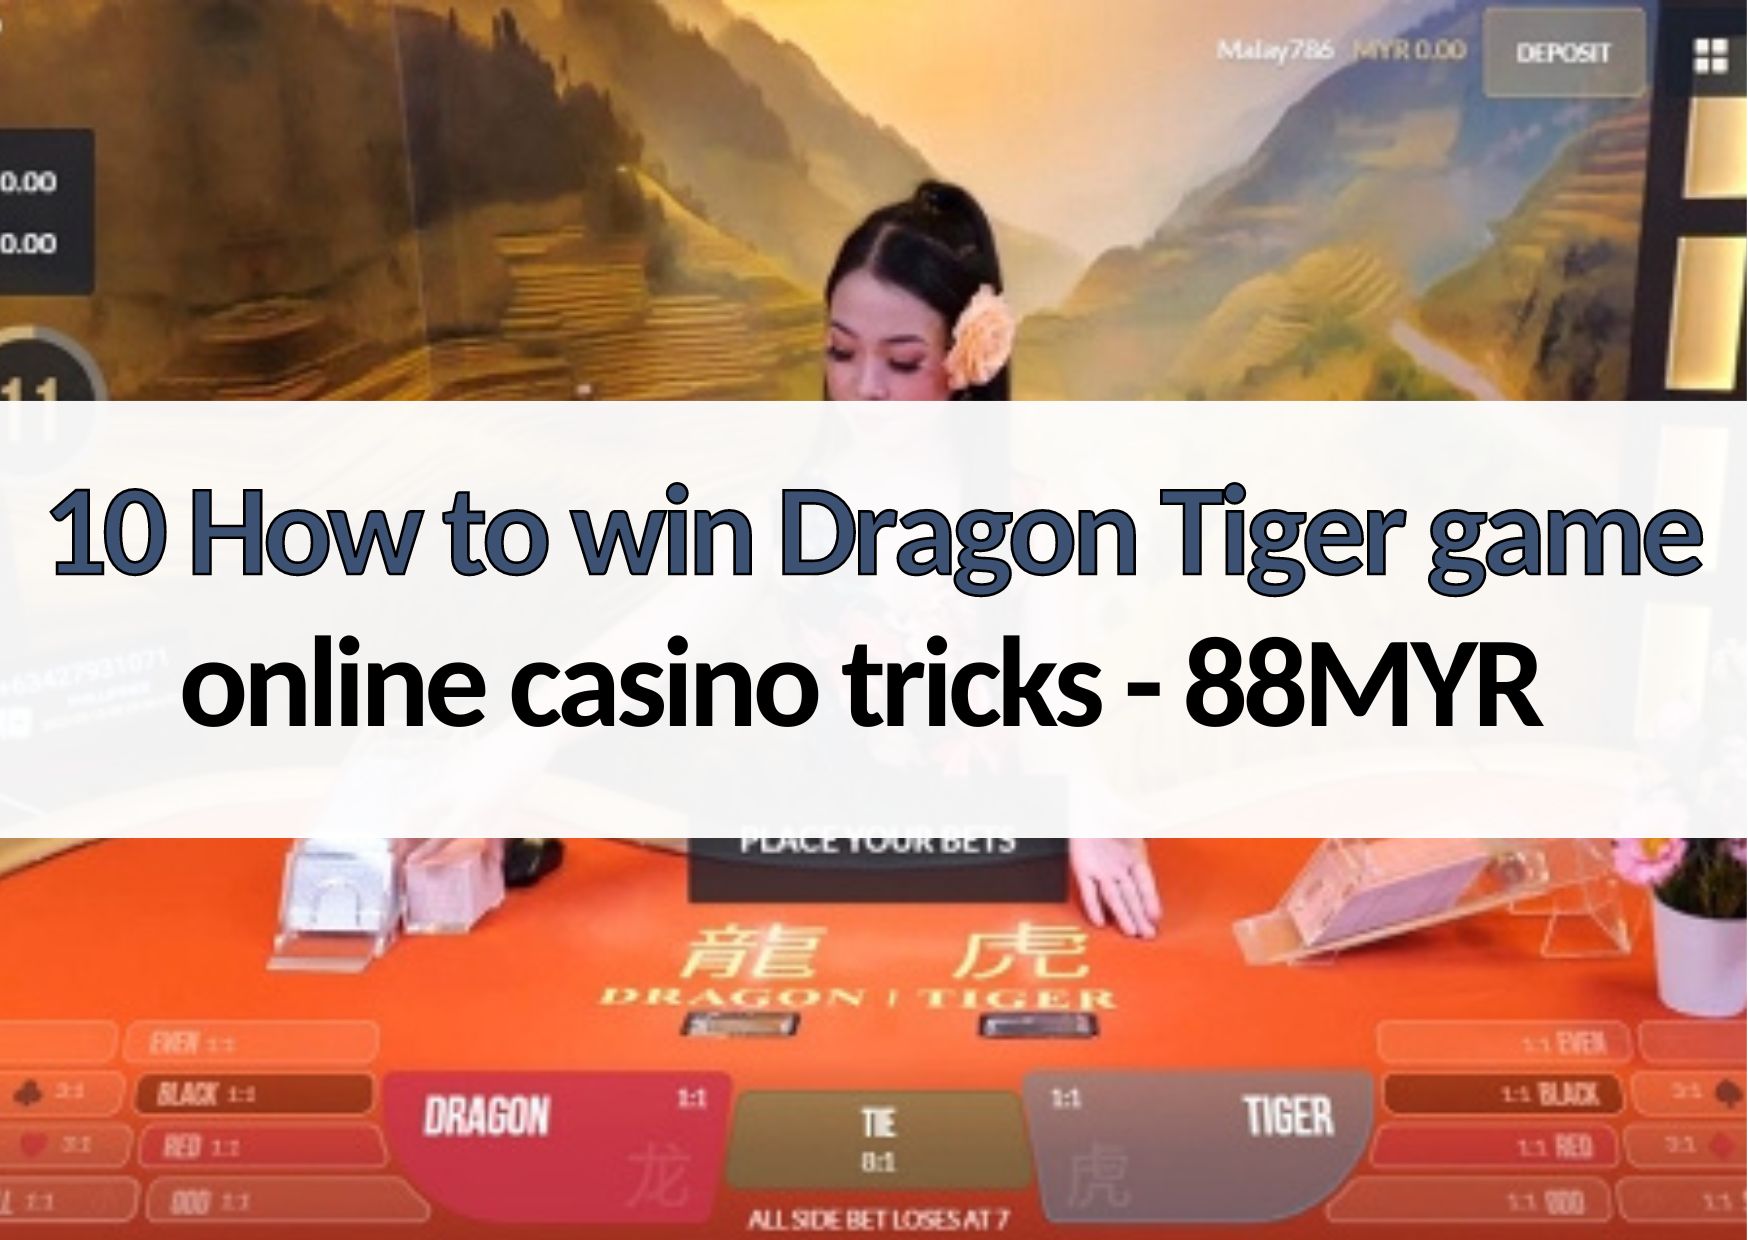 How to win Dragon Tiger game